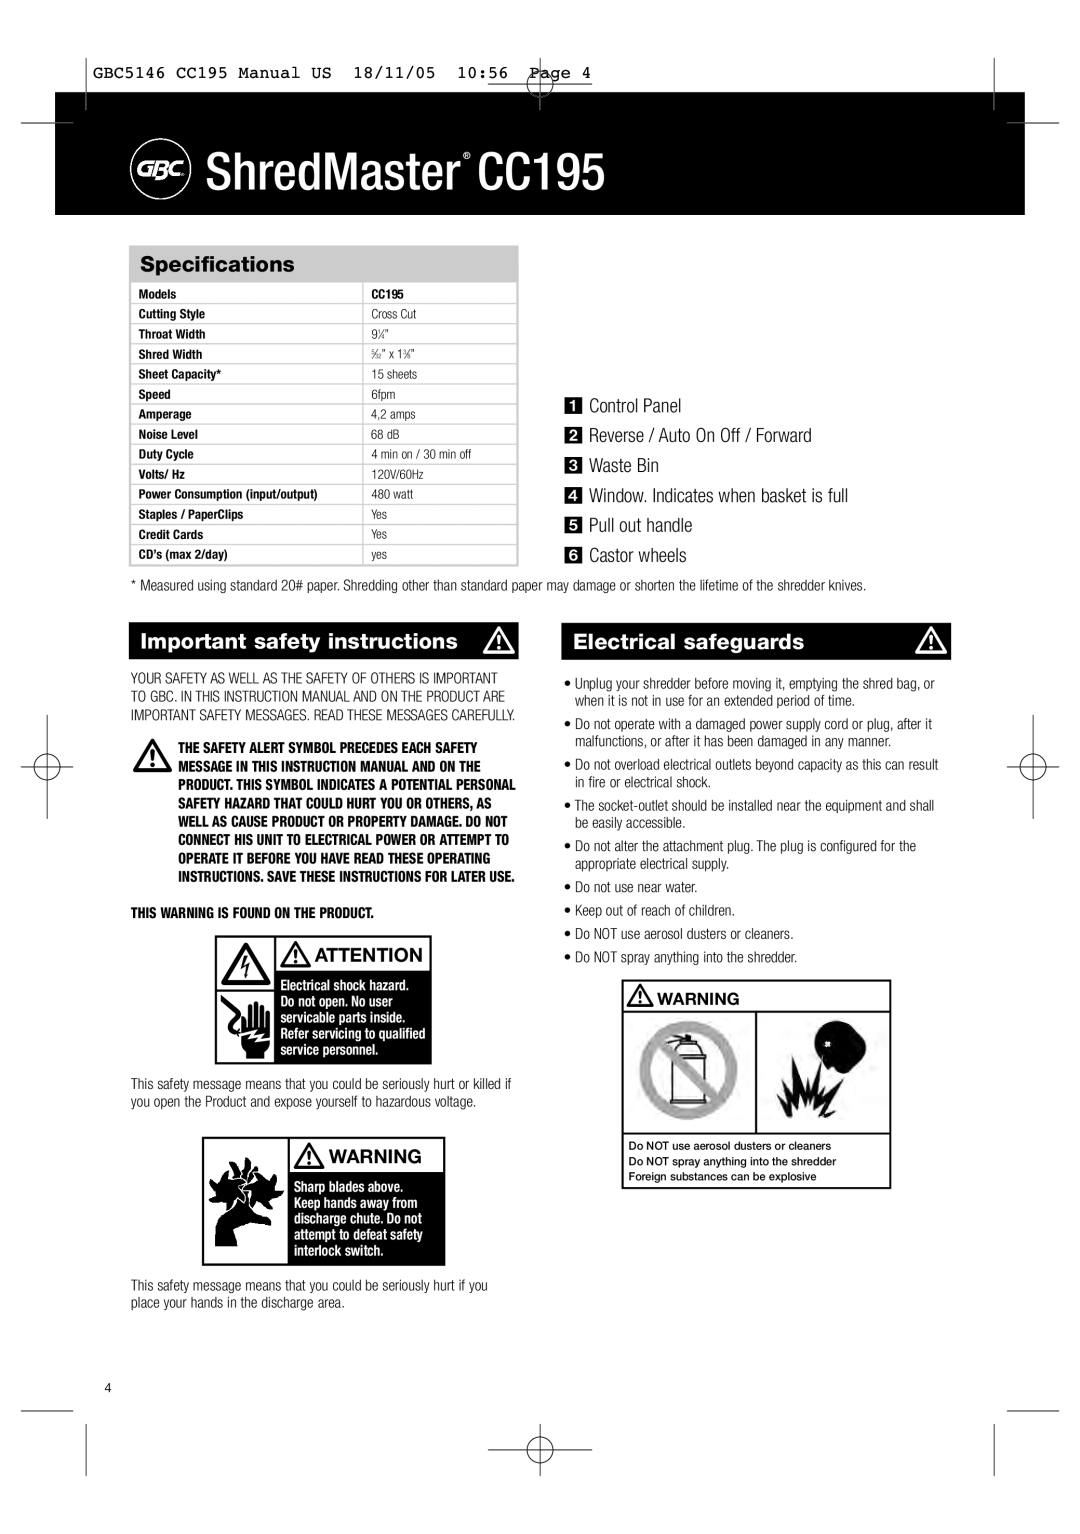 GBC Important safety instructions, Electrical safeguards, ShredMaster CC195, GBC5146 CC195 Manual US 18/11/05 1056 Page 